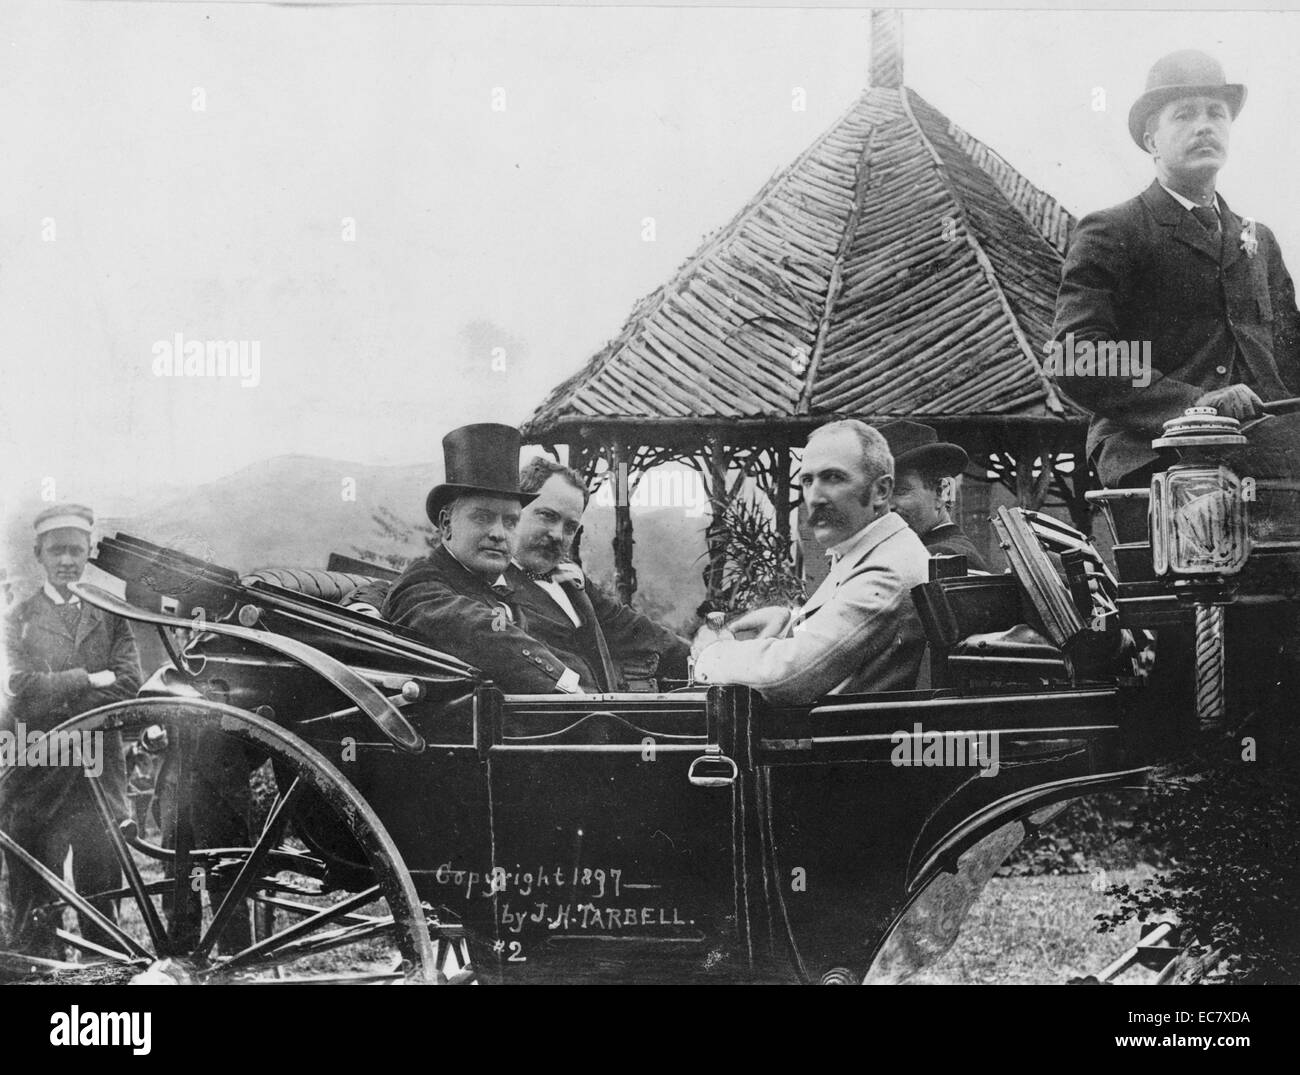 President McKinley in Asheville. President McKinley and others posing in an open automobile with mountains and rustic structure in background. McKinley (1843-1901)was the 25th President of the United States and led the nation to victory in the Spanish–American War, raised protective tariffs to promote American industry, and maintained the nation on the gold standard in a rejection of inflationary proposals. Stock Photo